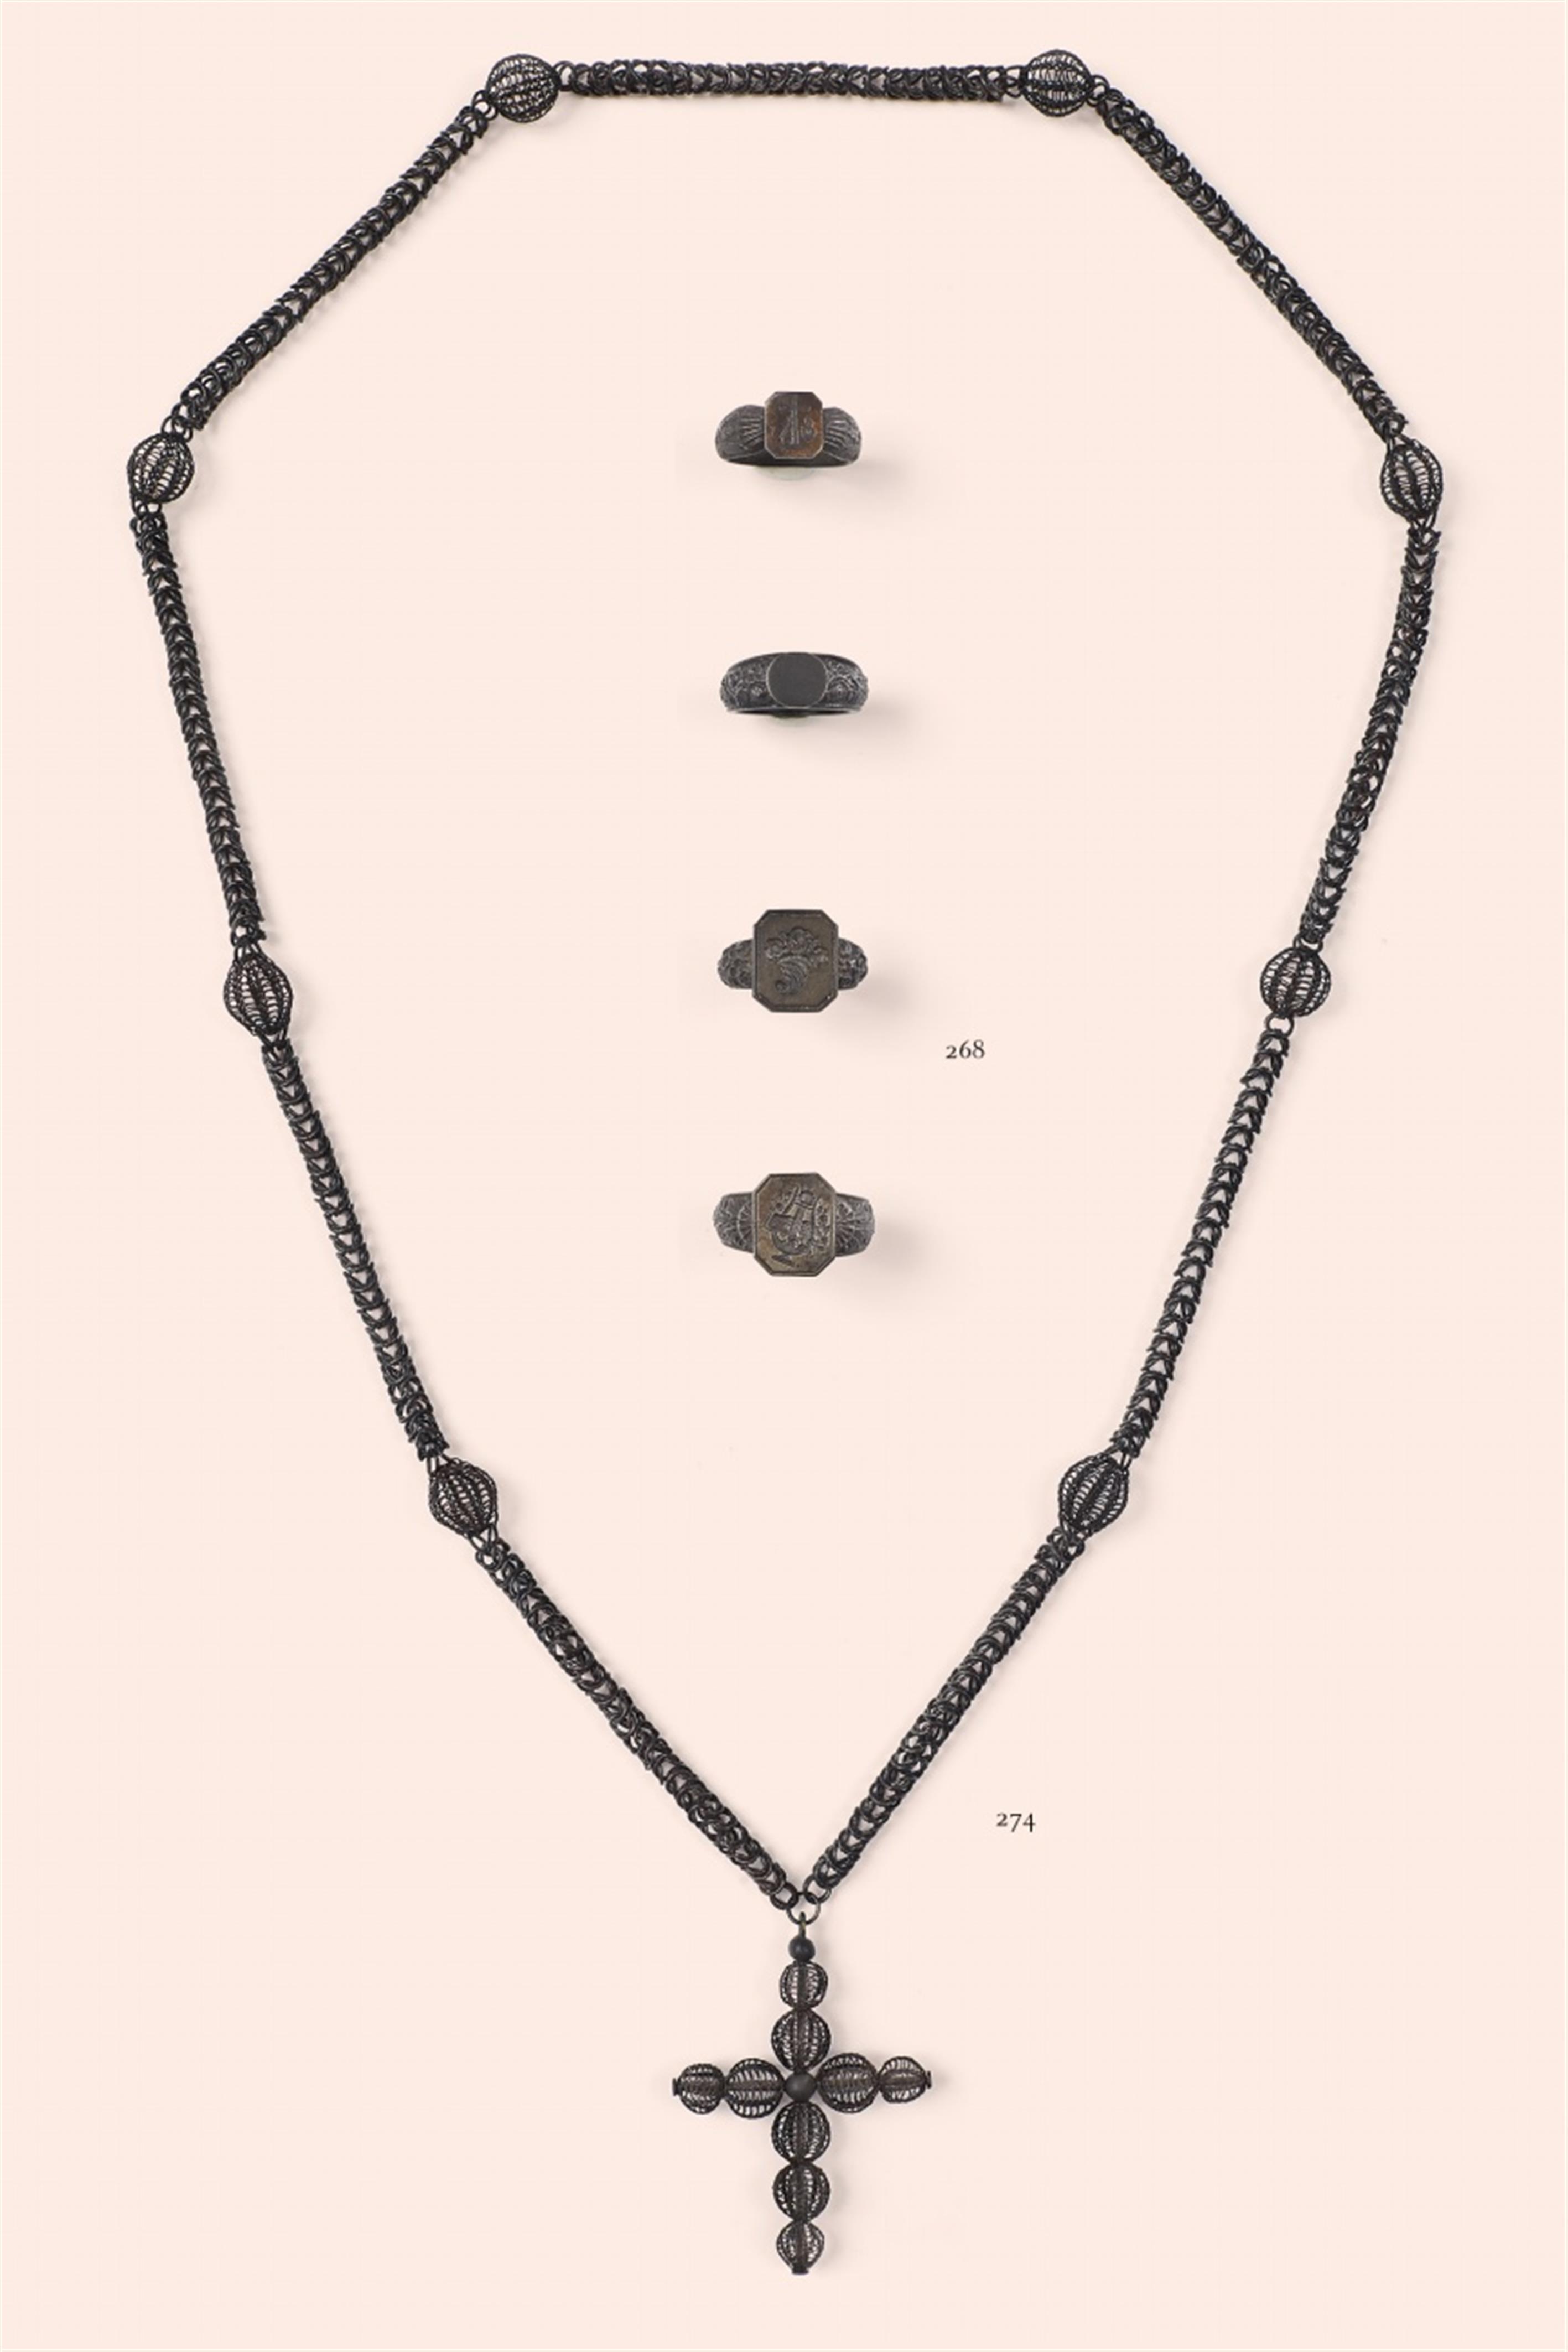 A cast iron necklace with a cross pendant - image-1